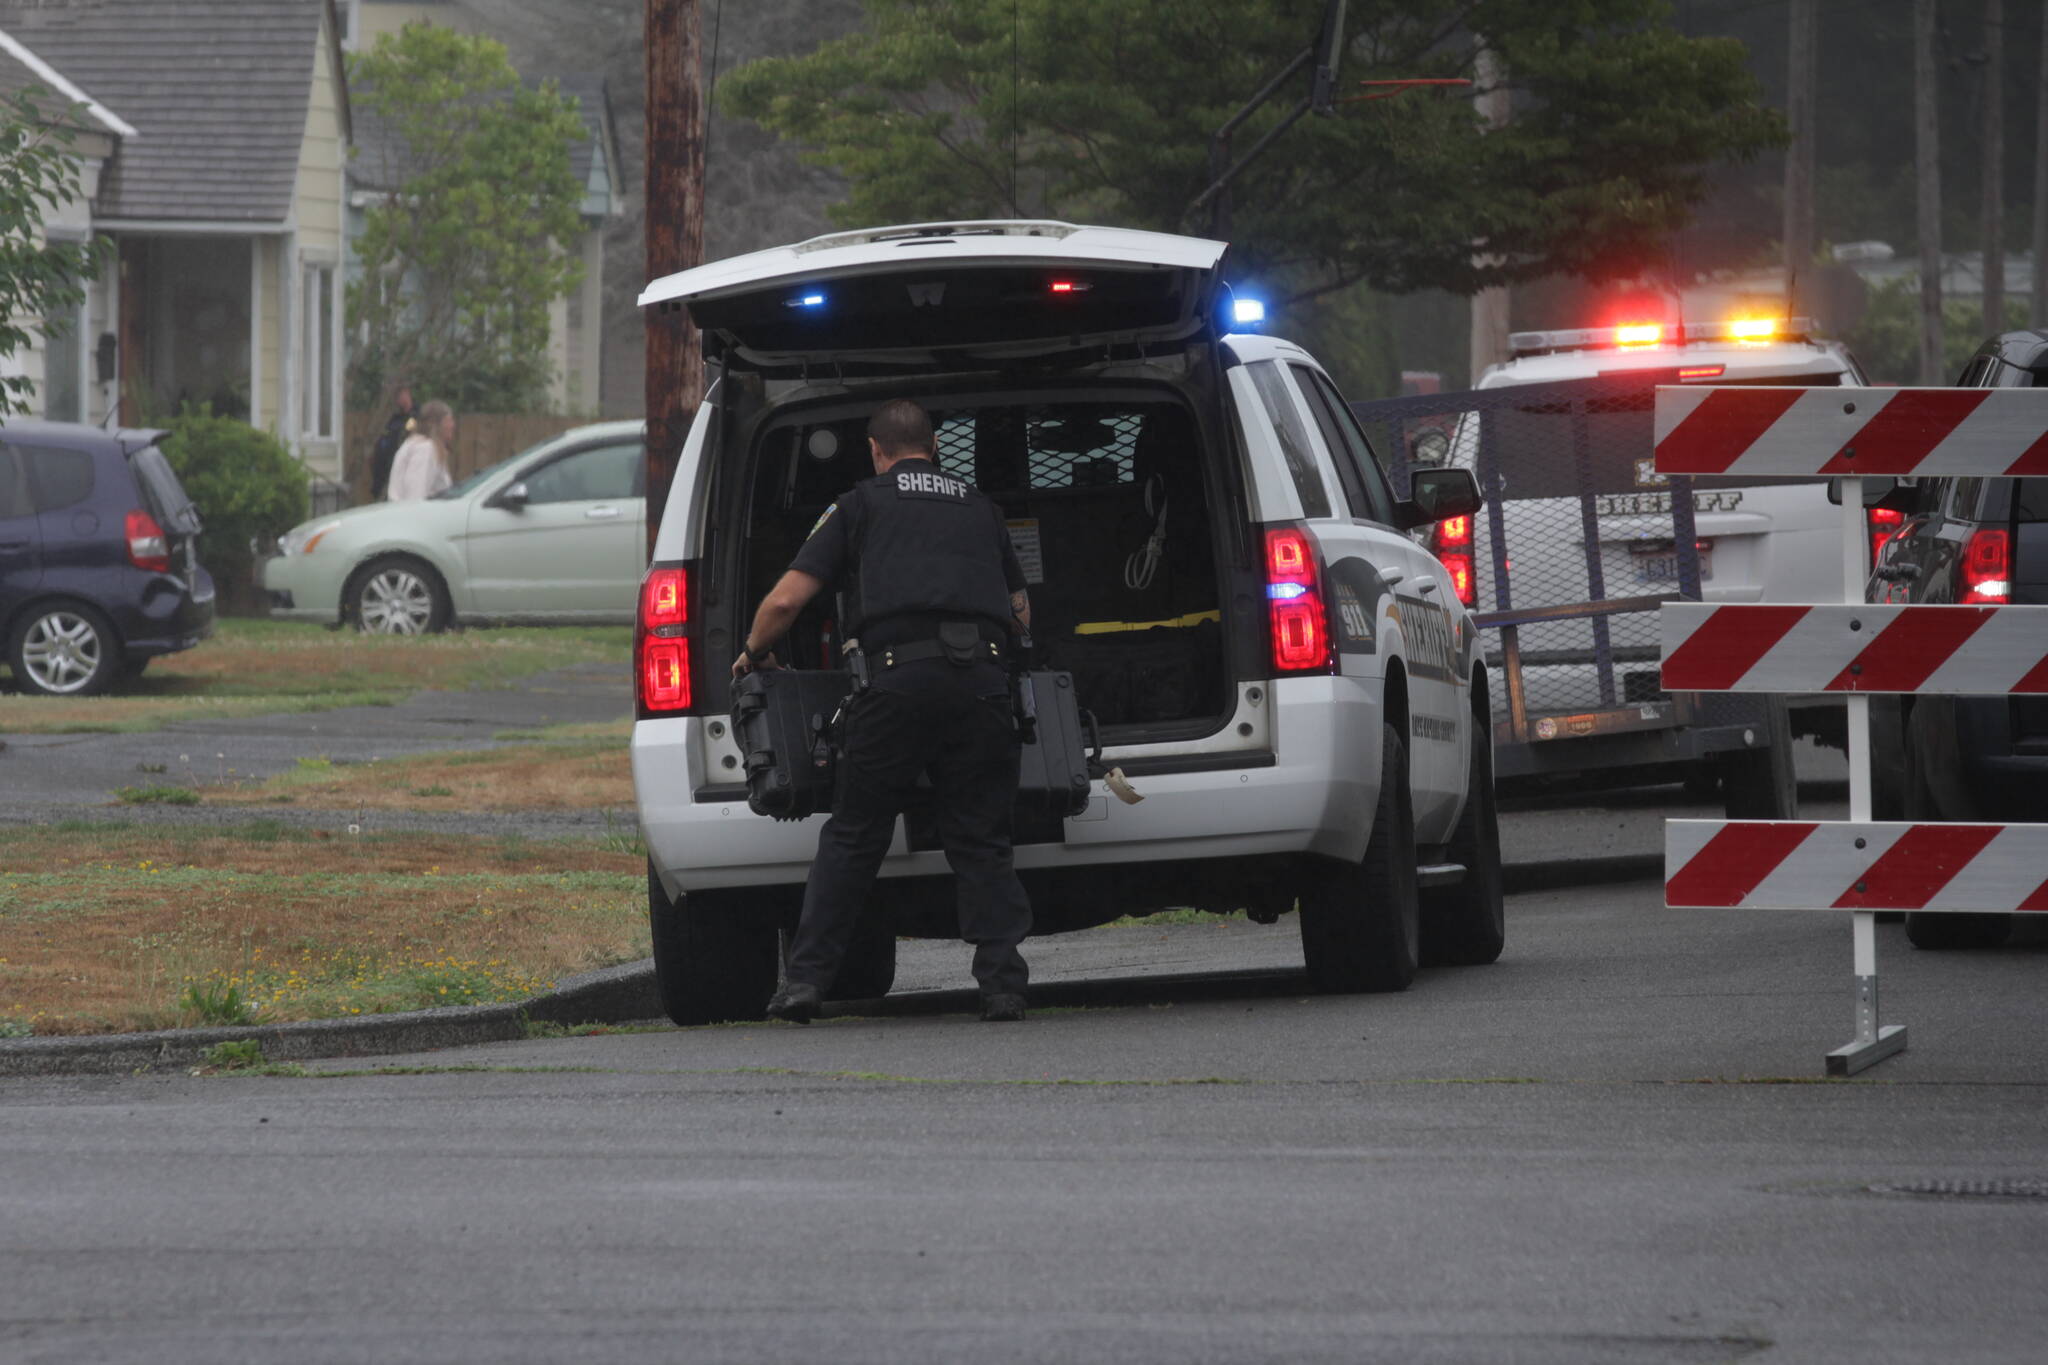 Michael S. Lockett / The Daily World
A sheriff’s deputy pulls an equipment case out of a vehicle during a standoff in Hoquiam on Aug. 28.